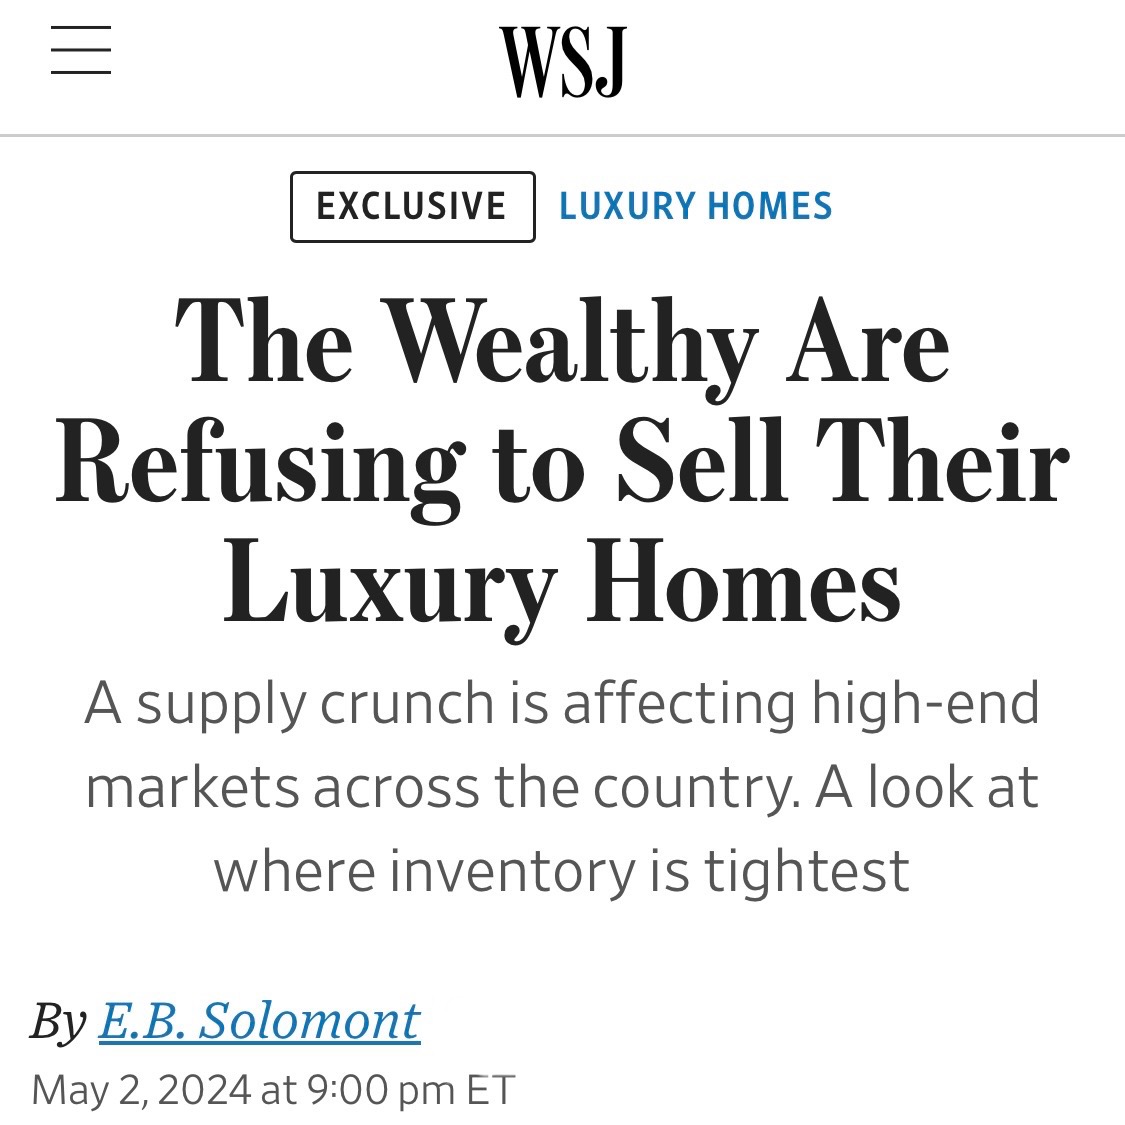 IN THE NEWS: WSJ EXCLUSIVE

The Wealthy Are Refusing to Sell Their Luxury Homes

wsj.com/real-estate/lu…

Kristen Routh-Silberman
DRE# S.0074661

#wsj #vegasluxuryrealestate #ellimanagents #ellimannevada #douglaselliman #douglasellimanrealestate #luxuryrealestate #luxurylifestyle